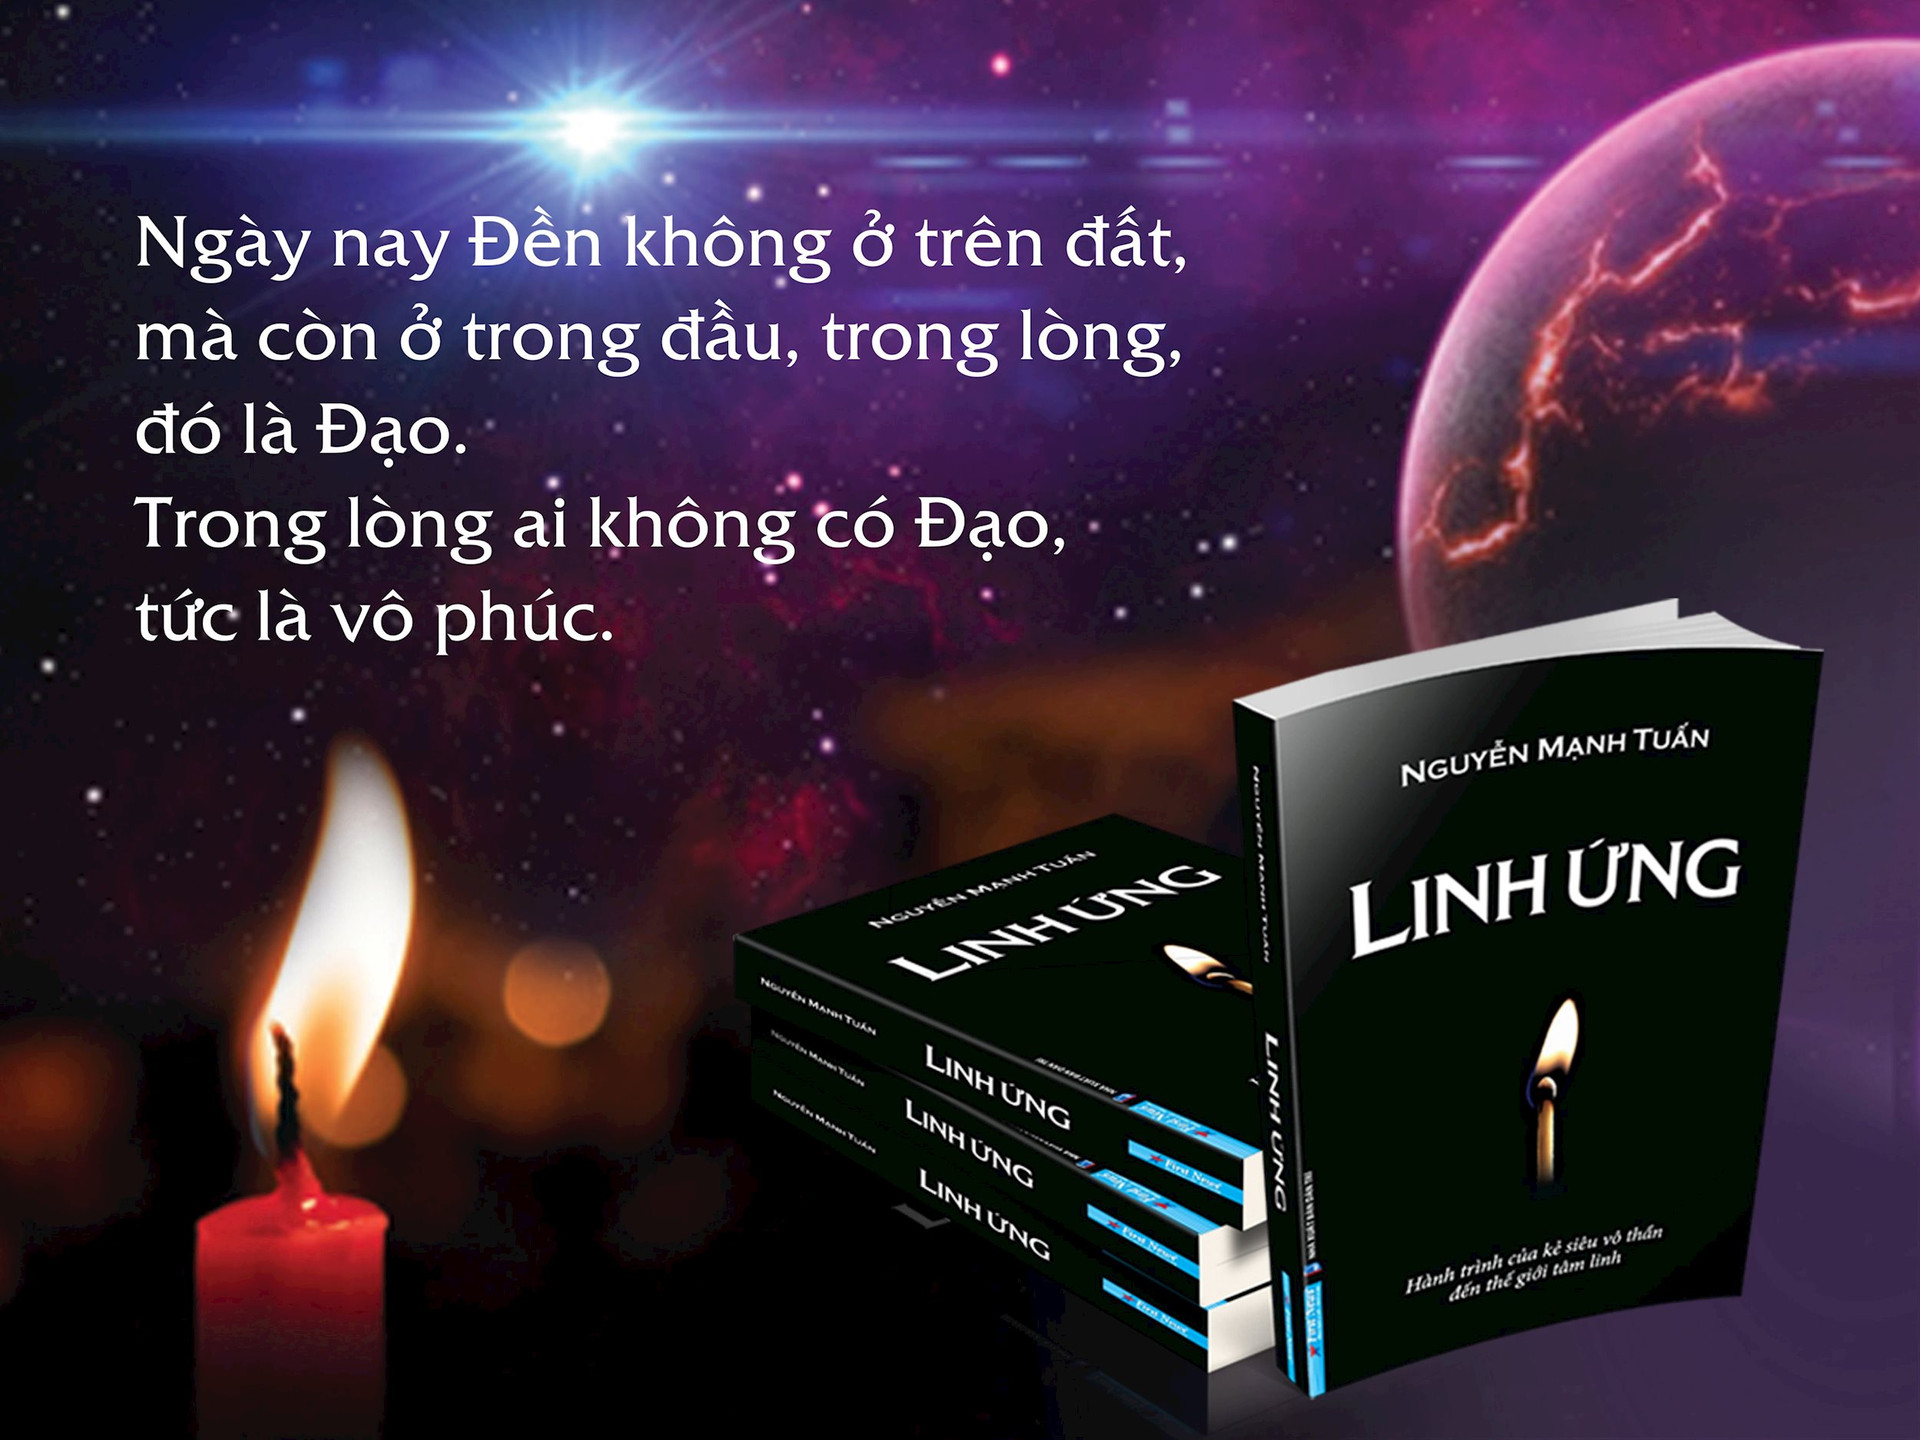 quote-linh-ung-1-.jpg